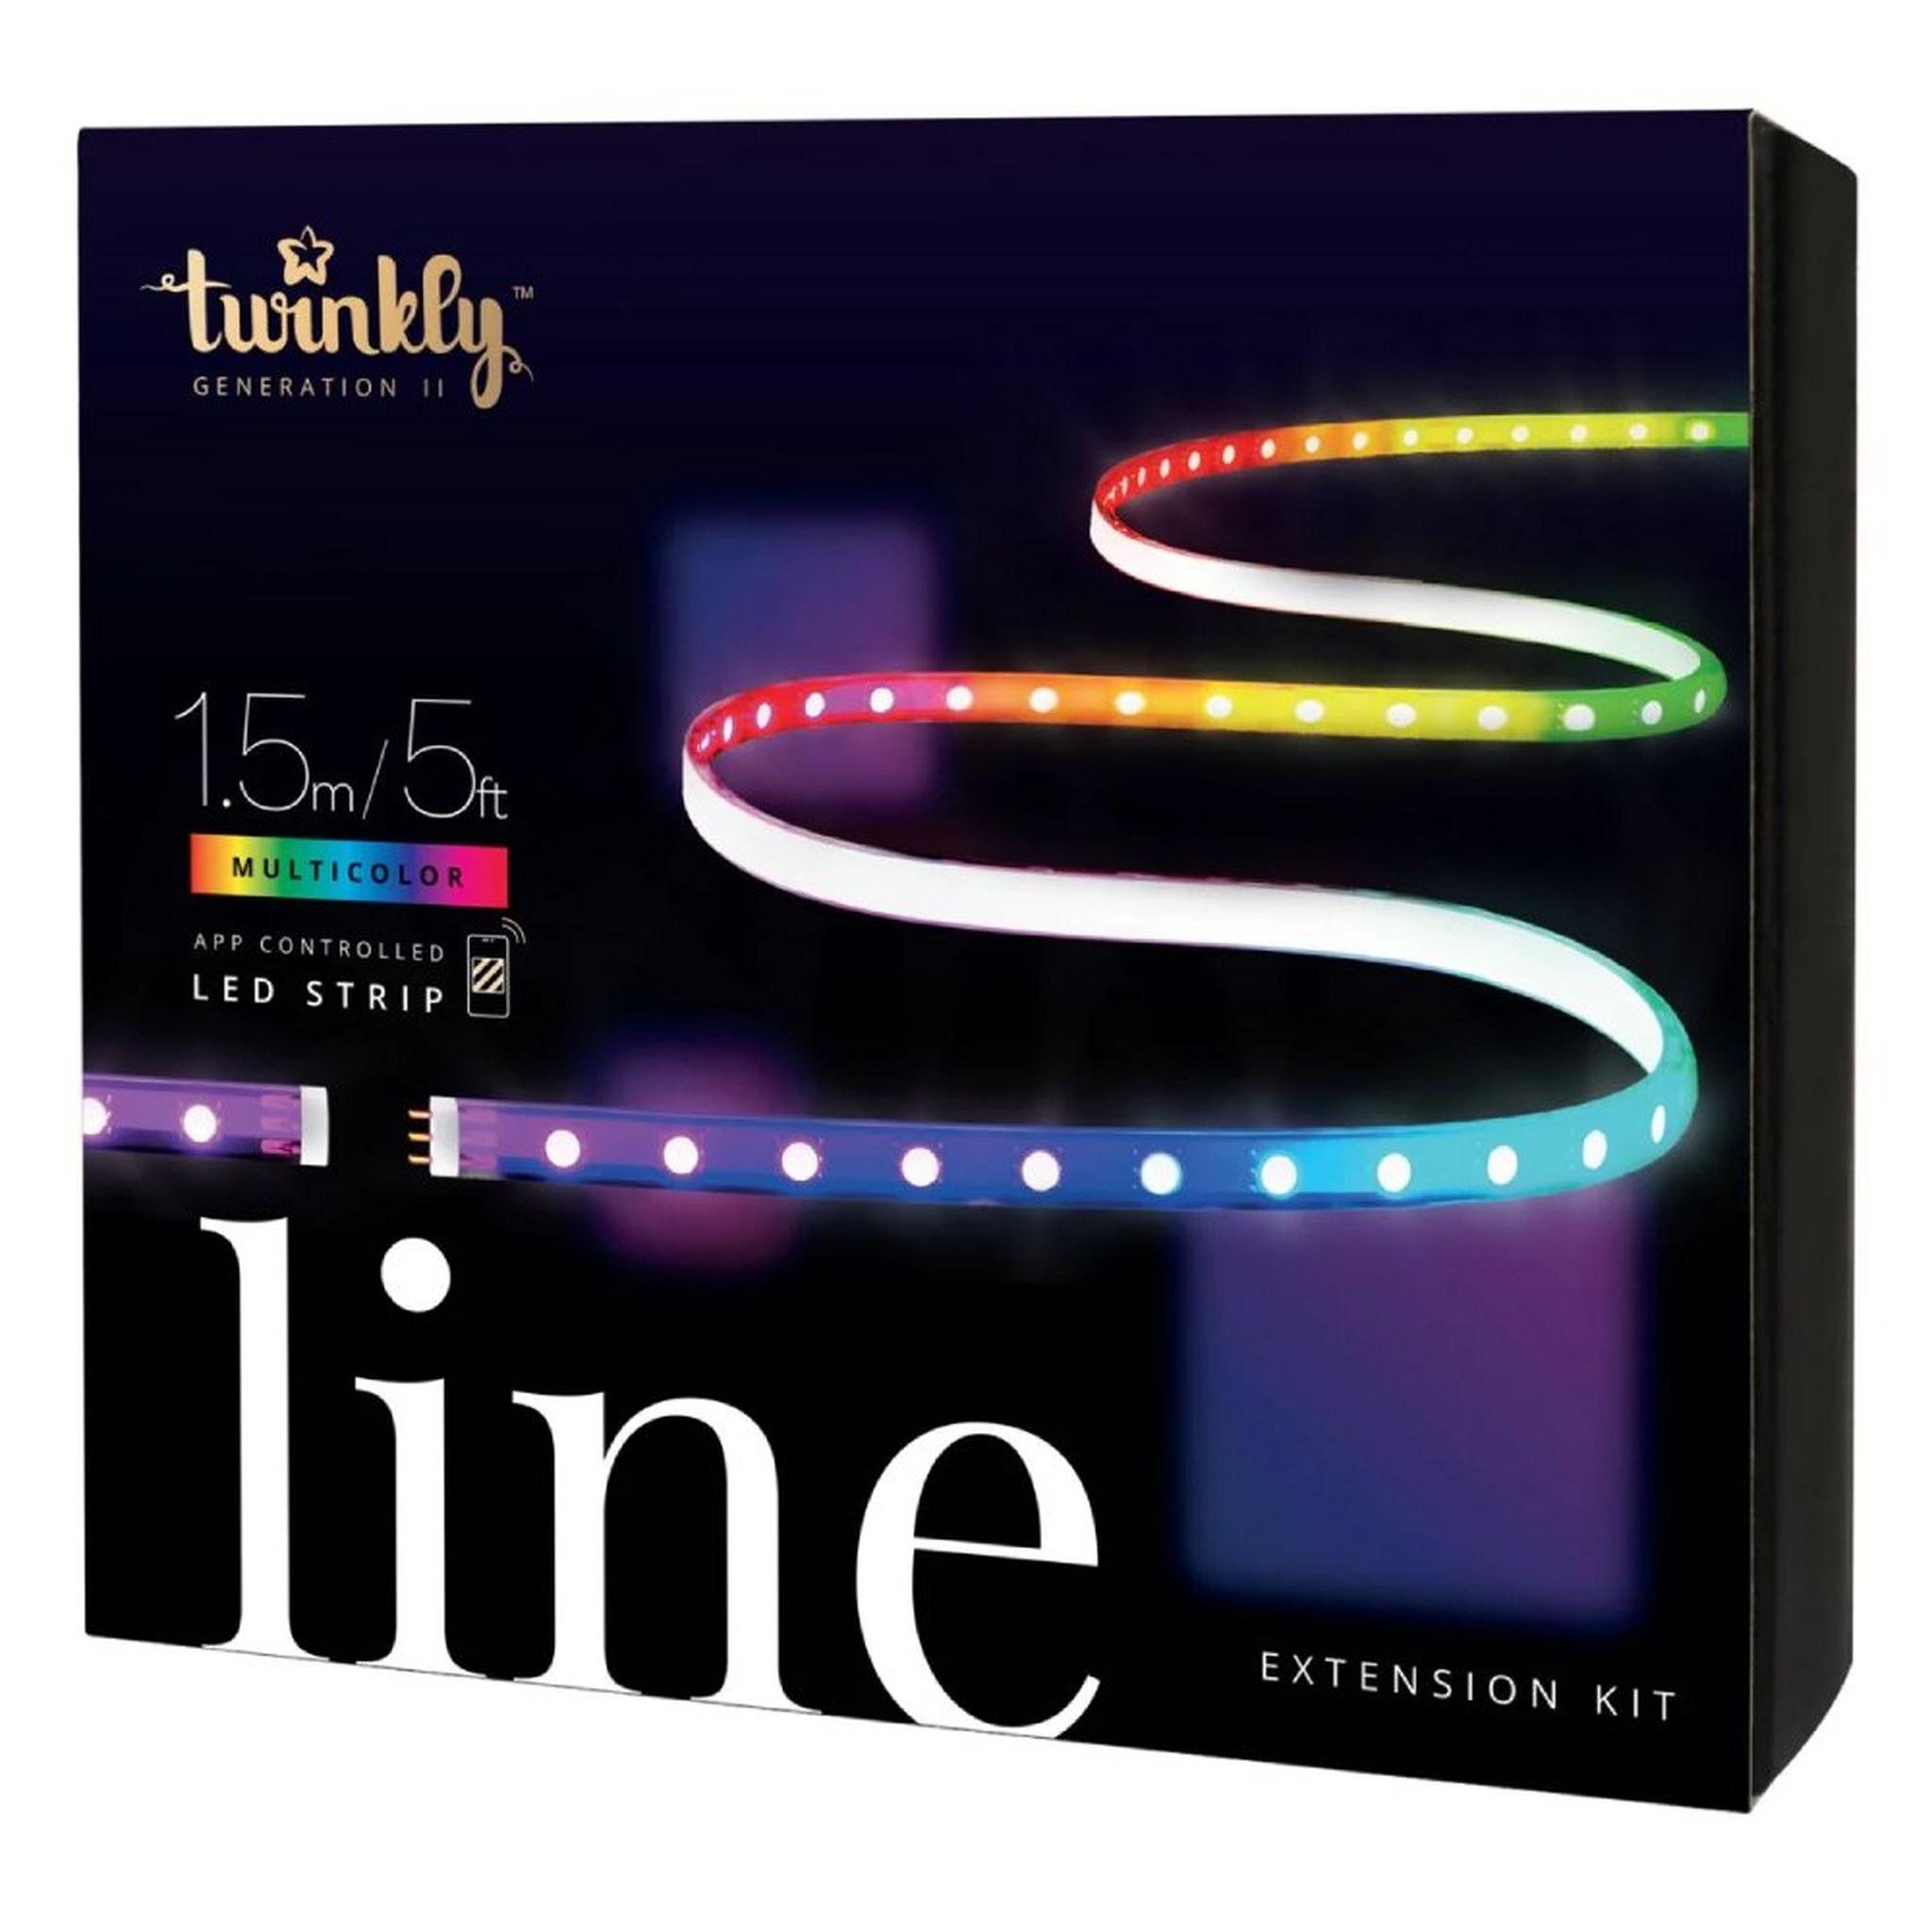 Twinkly Line Extension Kit - 1.5M 100 LEDs RGB App-Controlled Adhesive Gen II - White